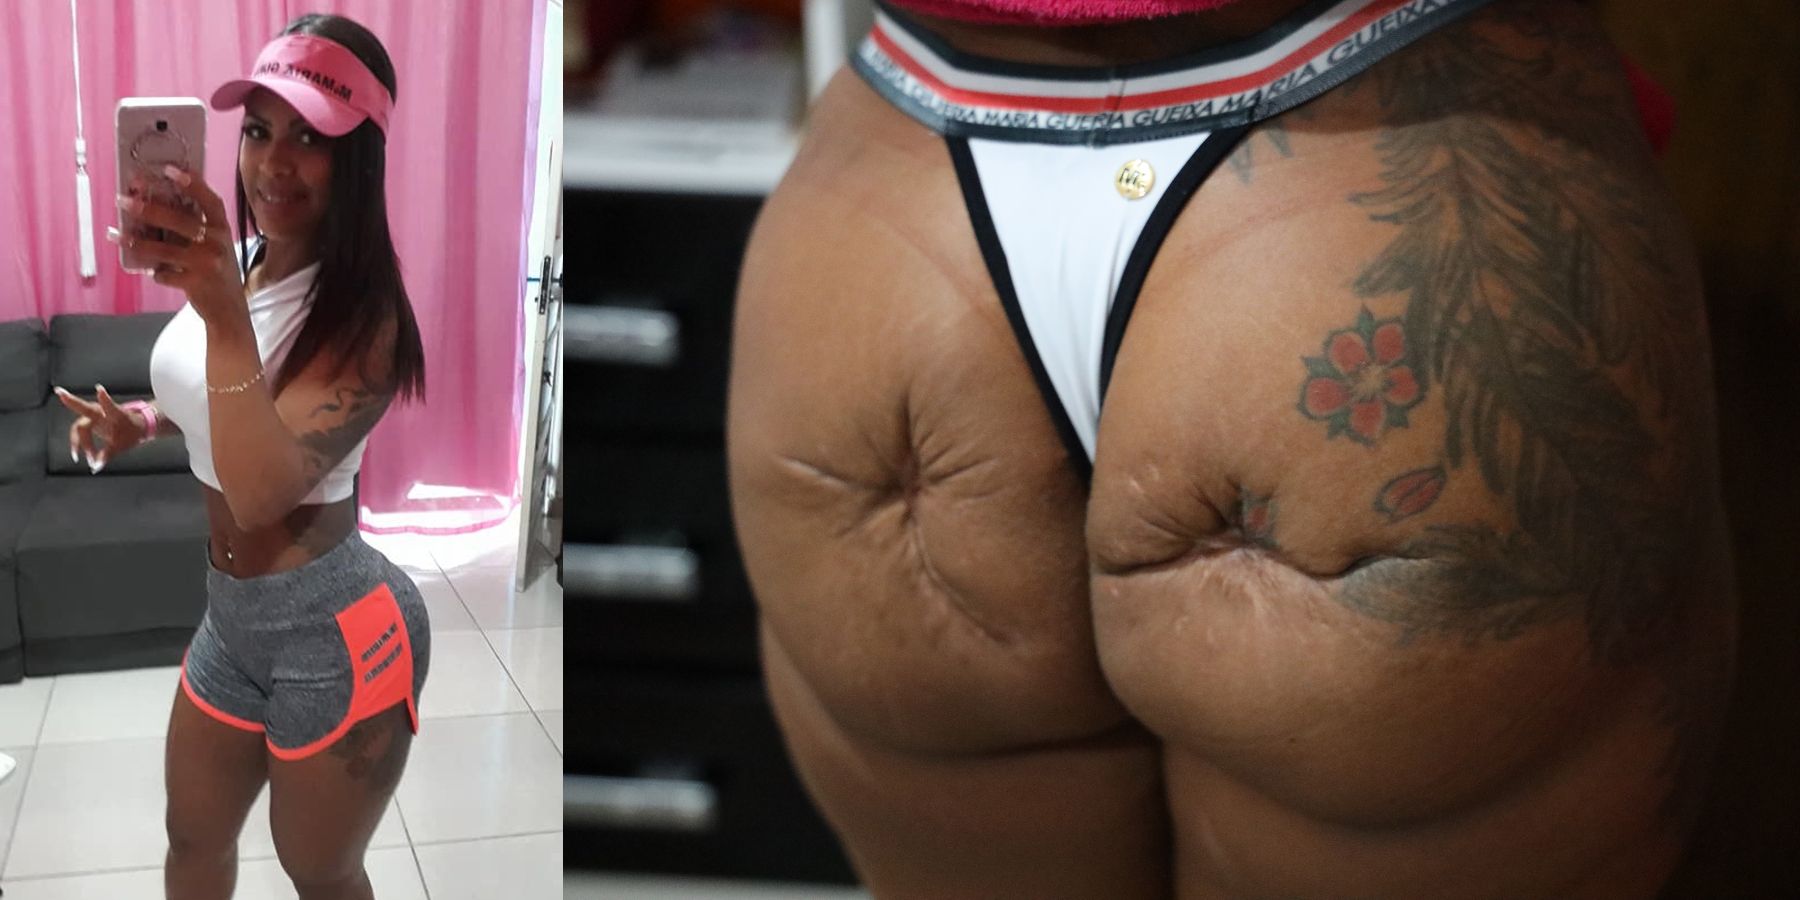 This Brazilian Woman Is Left Disfigured With Crater-like Scars After Silicone Butt Injections Go Horribly Wrong News